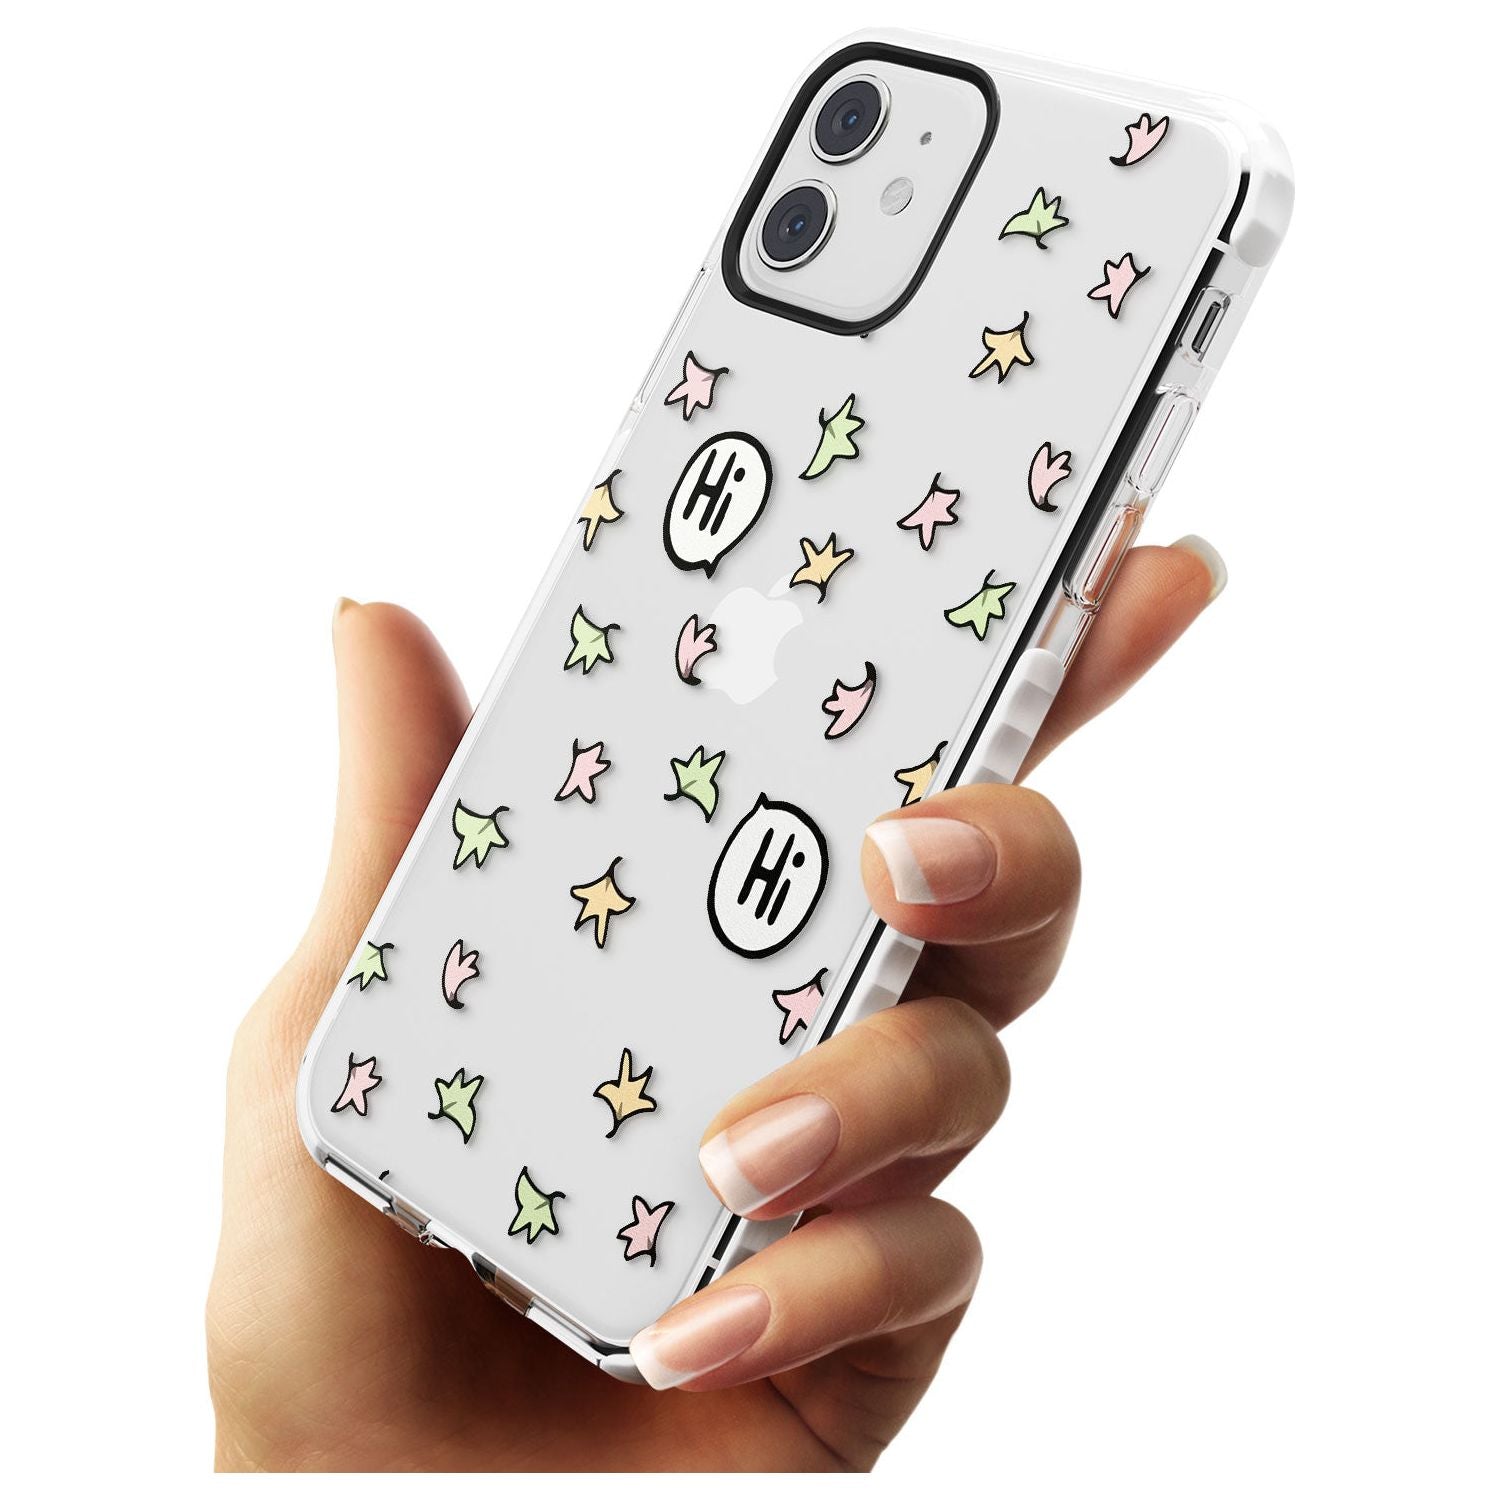 Heartstopper Leaves Pattern Impact Phone Case for iPhone 11